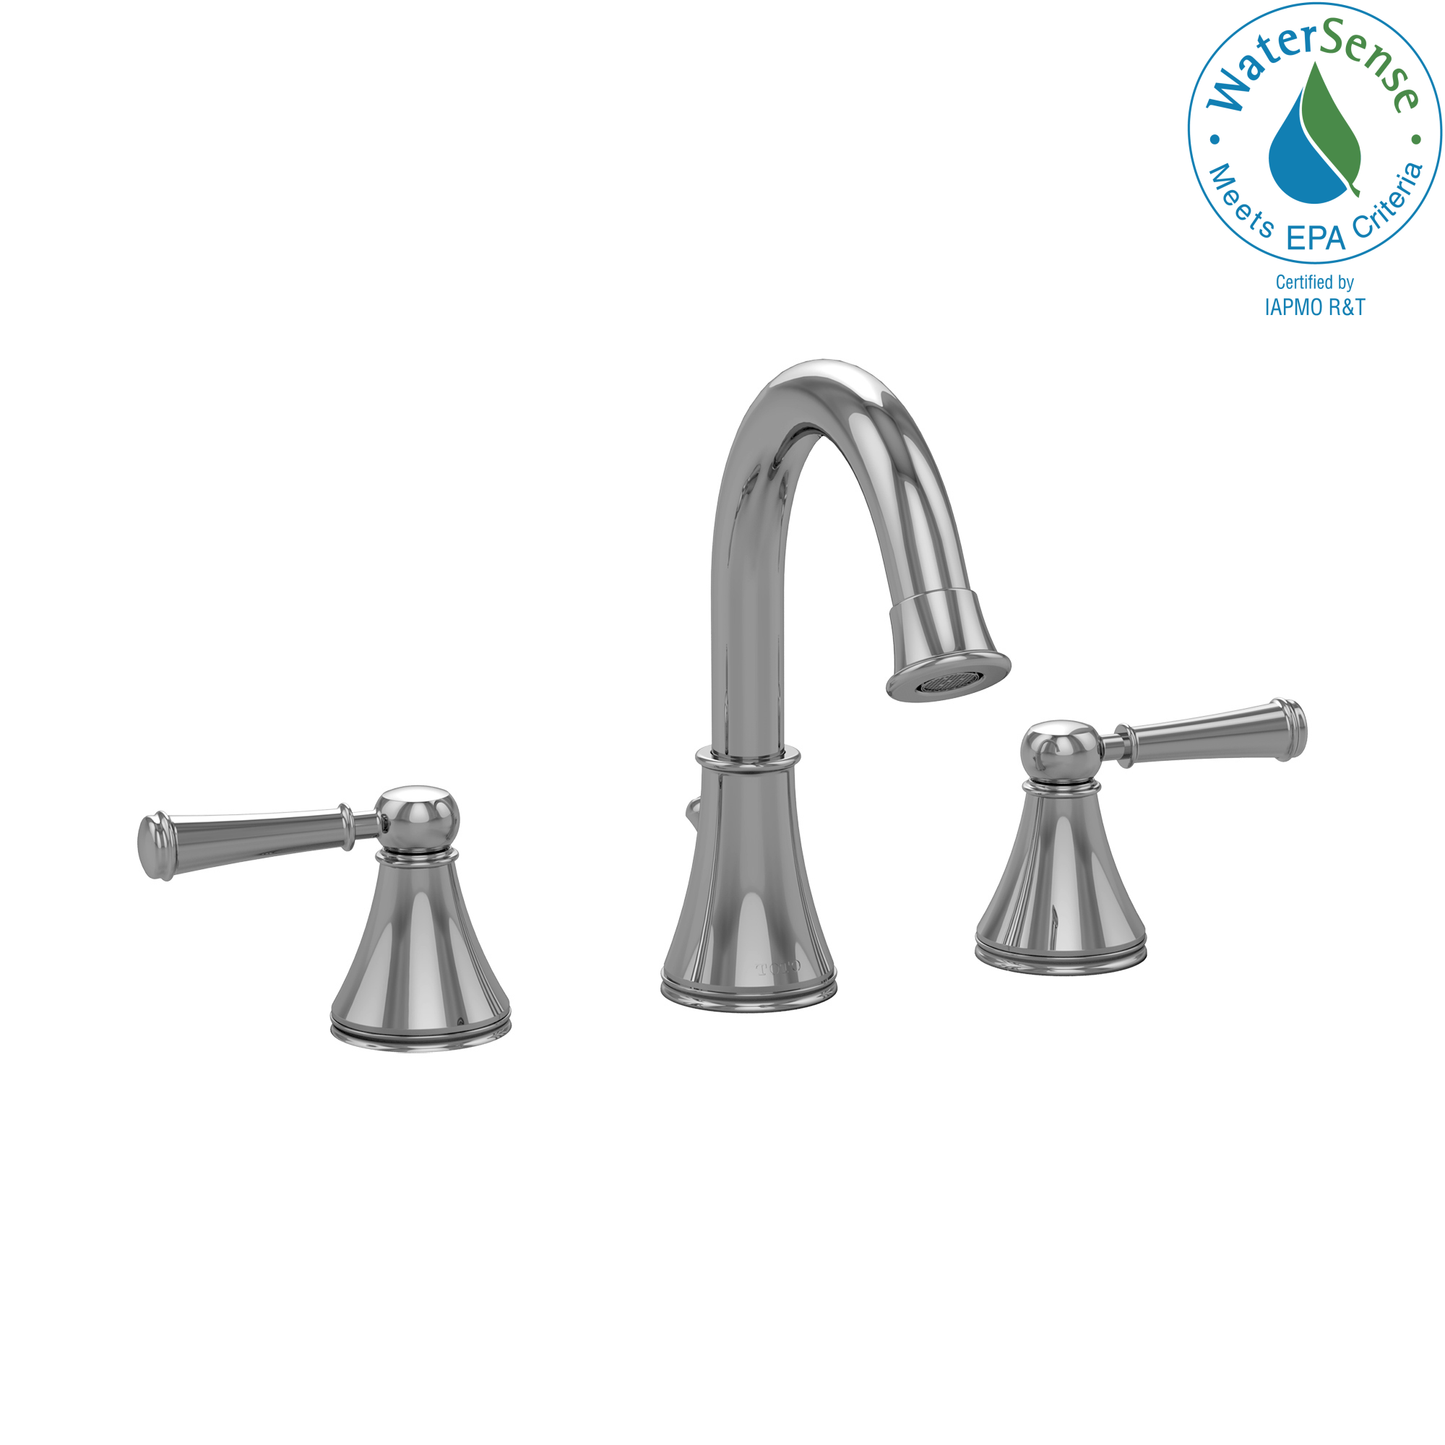 Toto TL220DD1H#CP - Vivian Alta Two Handle Widespread 1.5 GPM Bathroom Sink Faucet, Polished Chrome